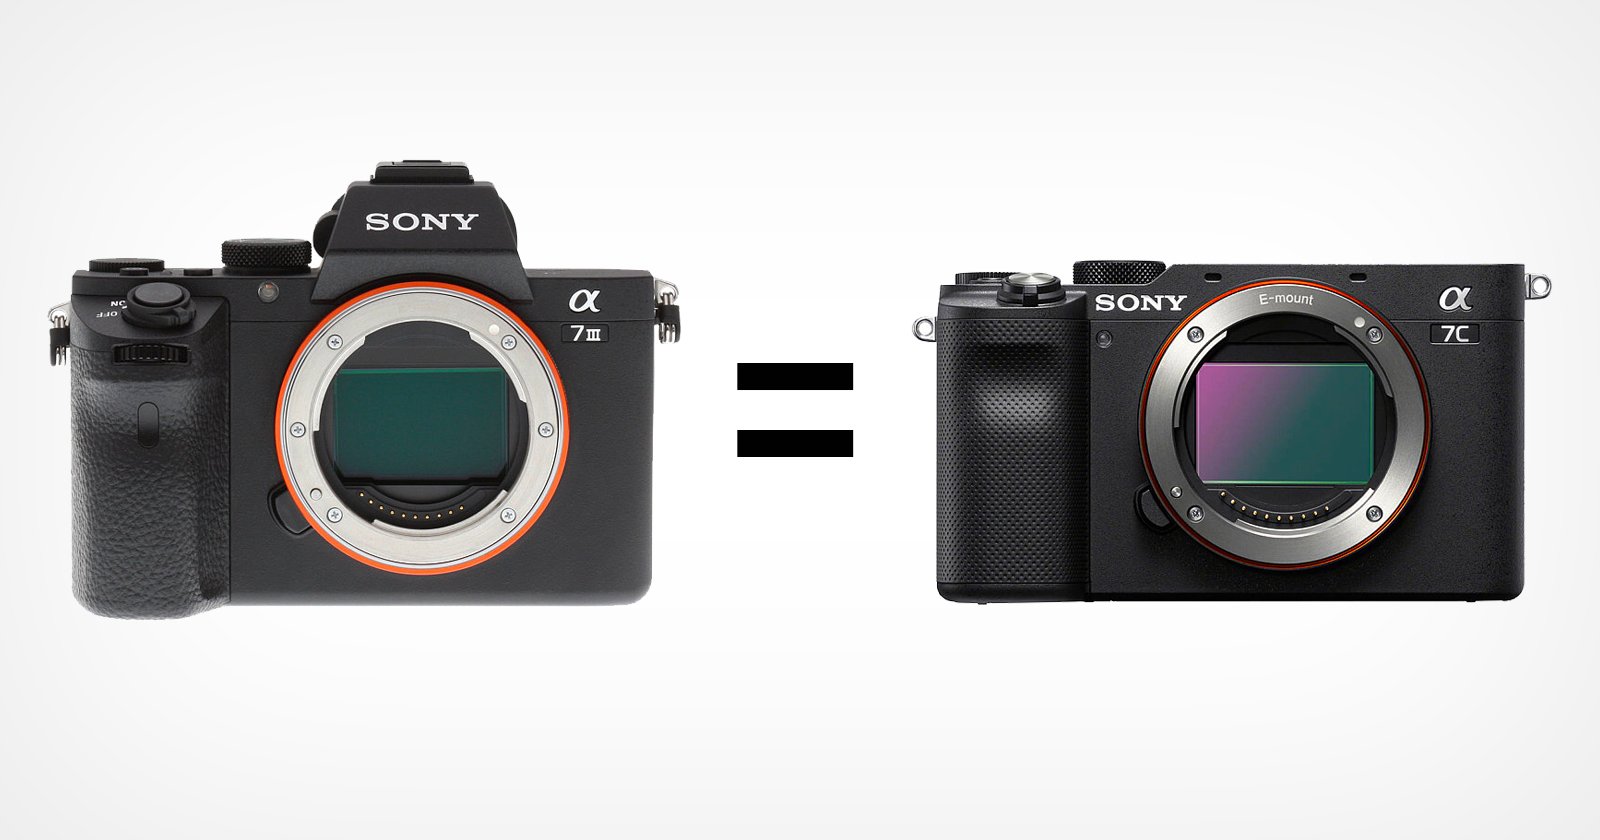 Sony a7C Images Appear More or Less Identical to Those Taken on